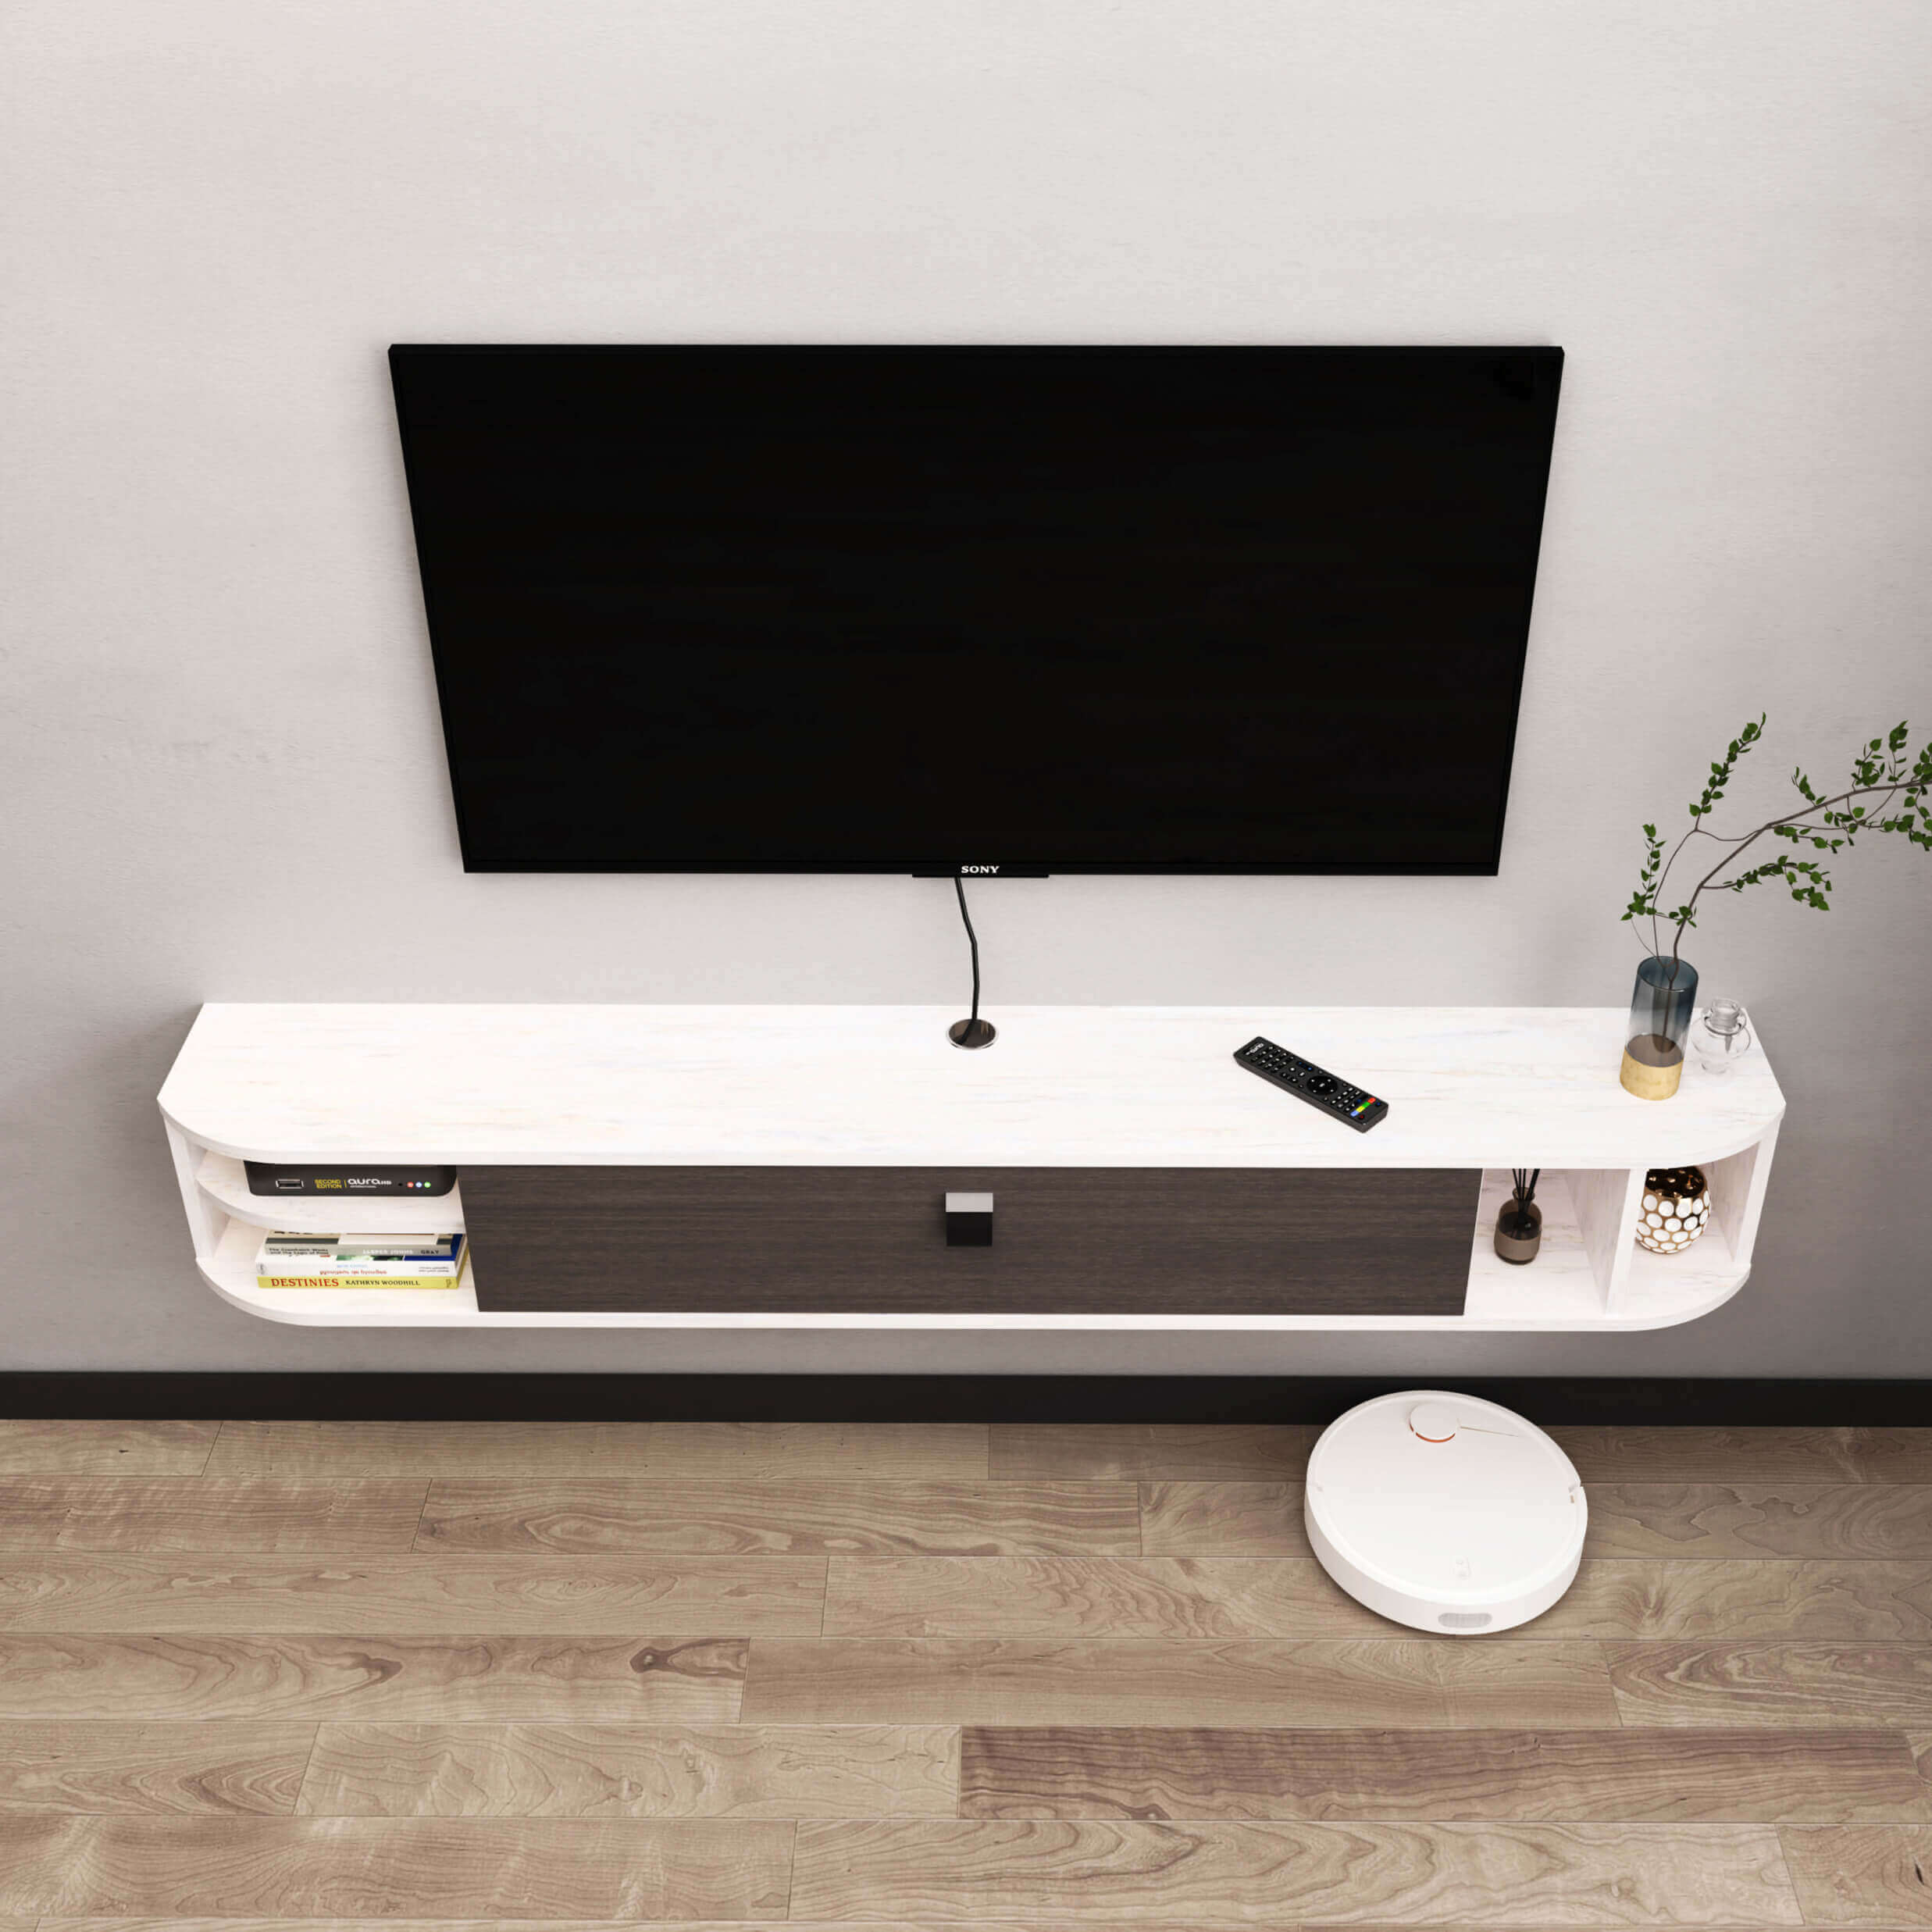 Custom Modern Plywood Floating TV Stand Shelf with Storage Cubbies Media Console